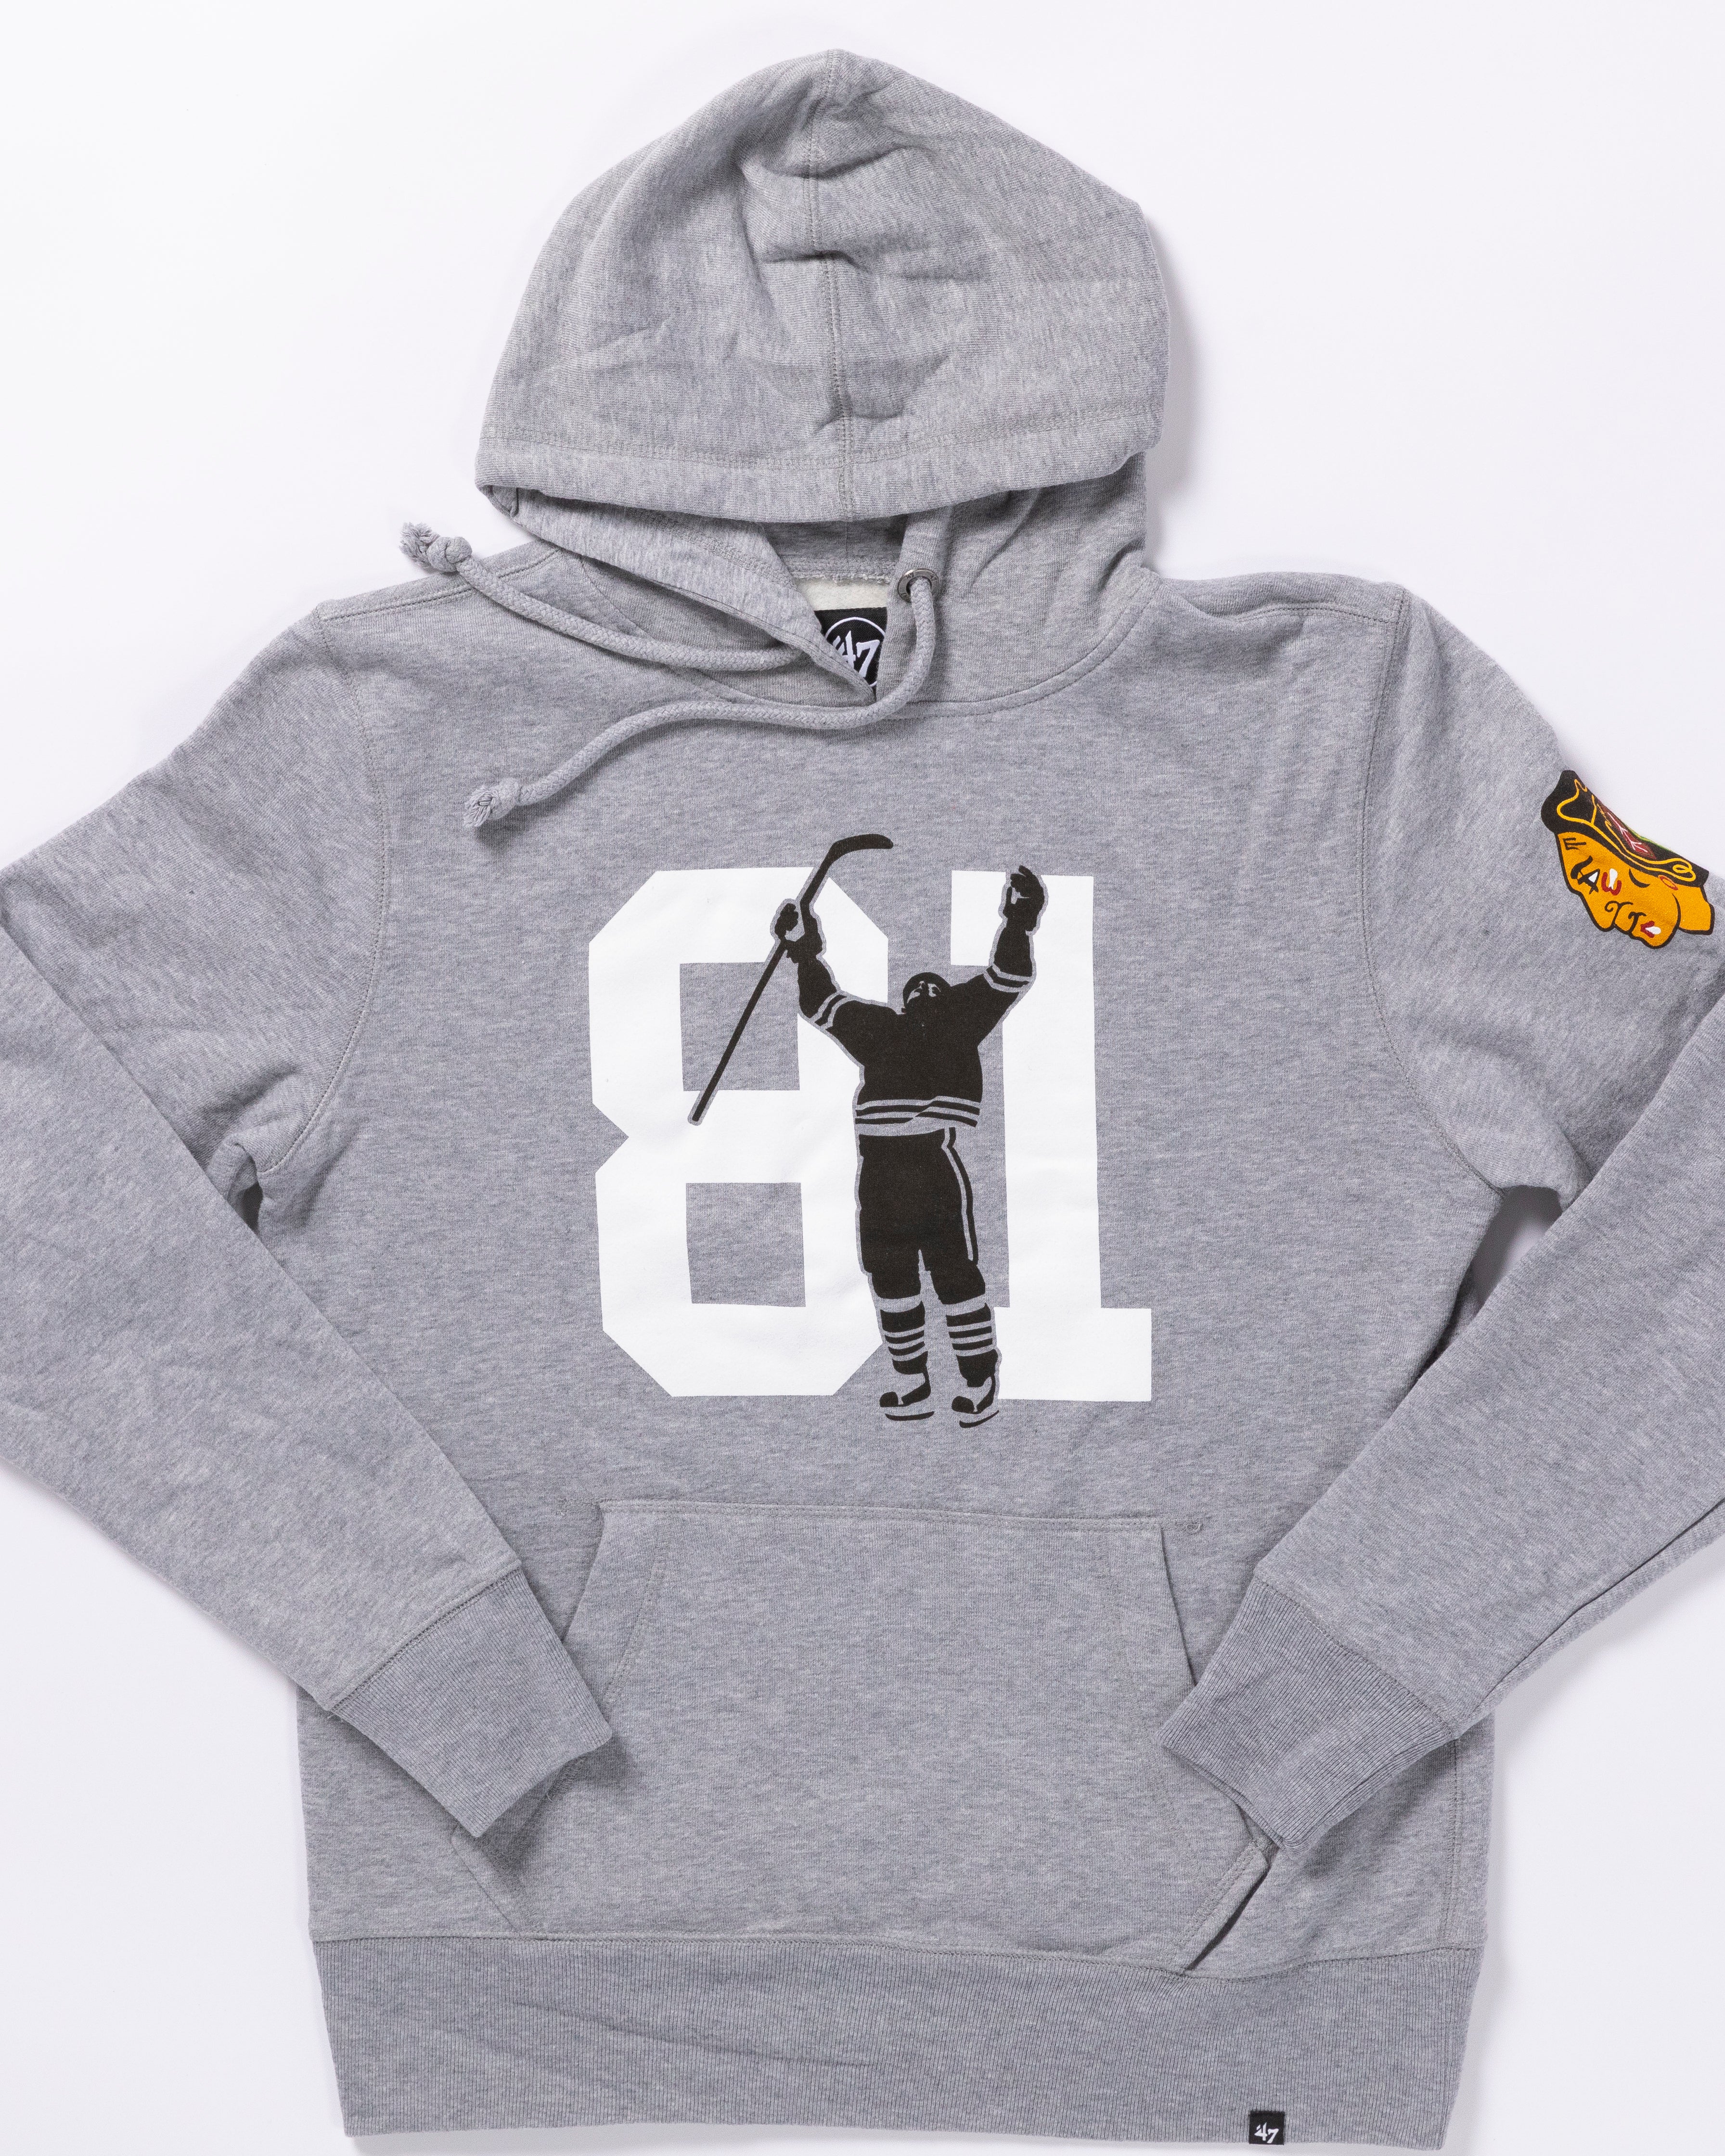 THIS JUST IN: Ladies Old Time Hockey Black Hoodie! Stop by the #Blackhawks  Store today!